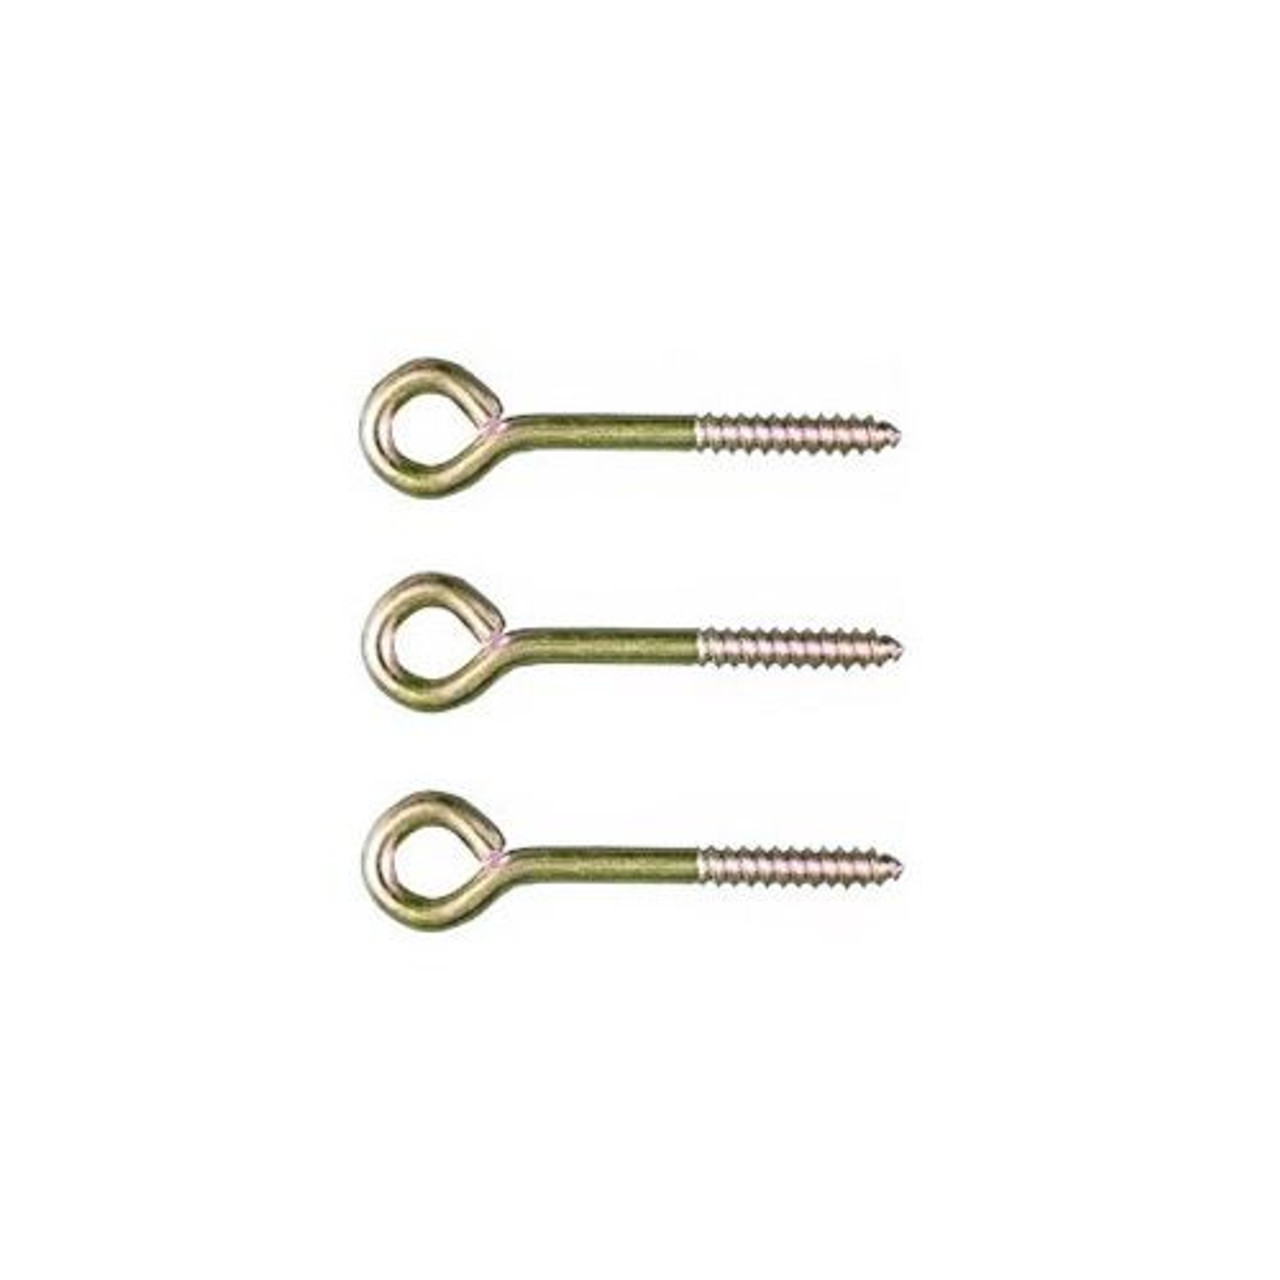 Channel Master 3093 Guy Cable Eye Lag Screw Bolt 3 Pack 1/4" Inches 3" Inches in Length Antenna Mast Support Eye Sharp Point Bite into Wood Steel Lag Screw Guy Wire Antenna Cable Support, Part # 3093